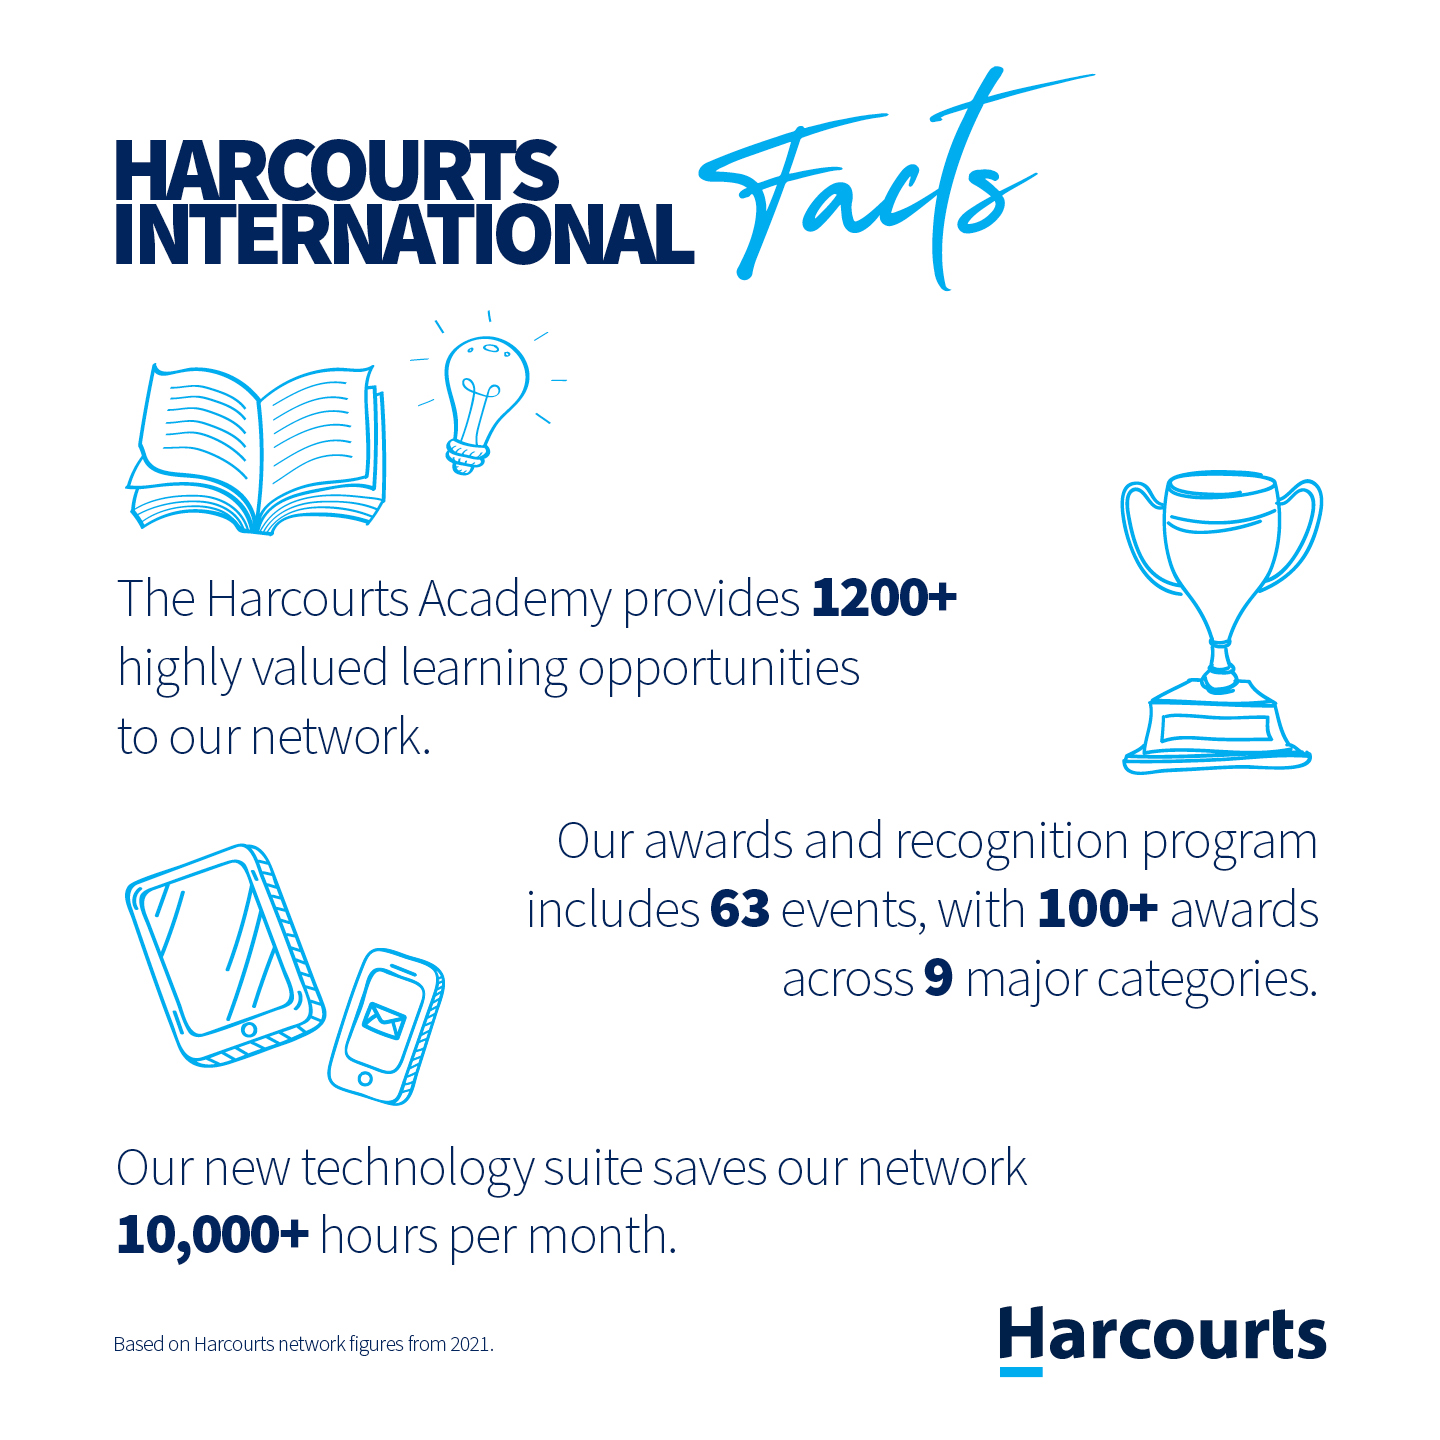 Fact: The Harcourts Academy provides 1200+ highly valued learning opportunities to our network.